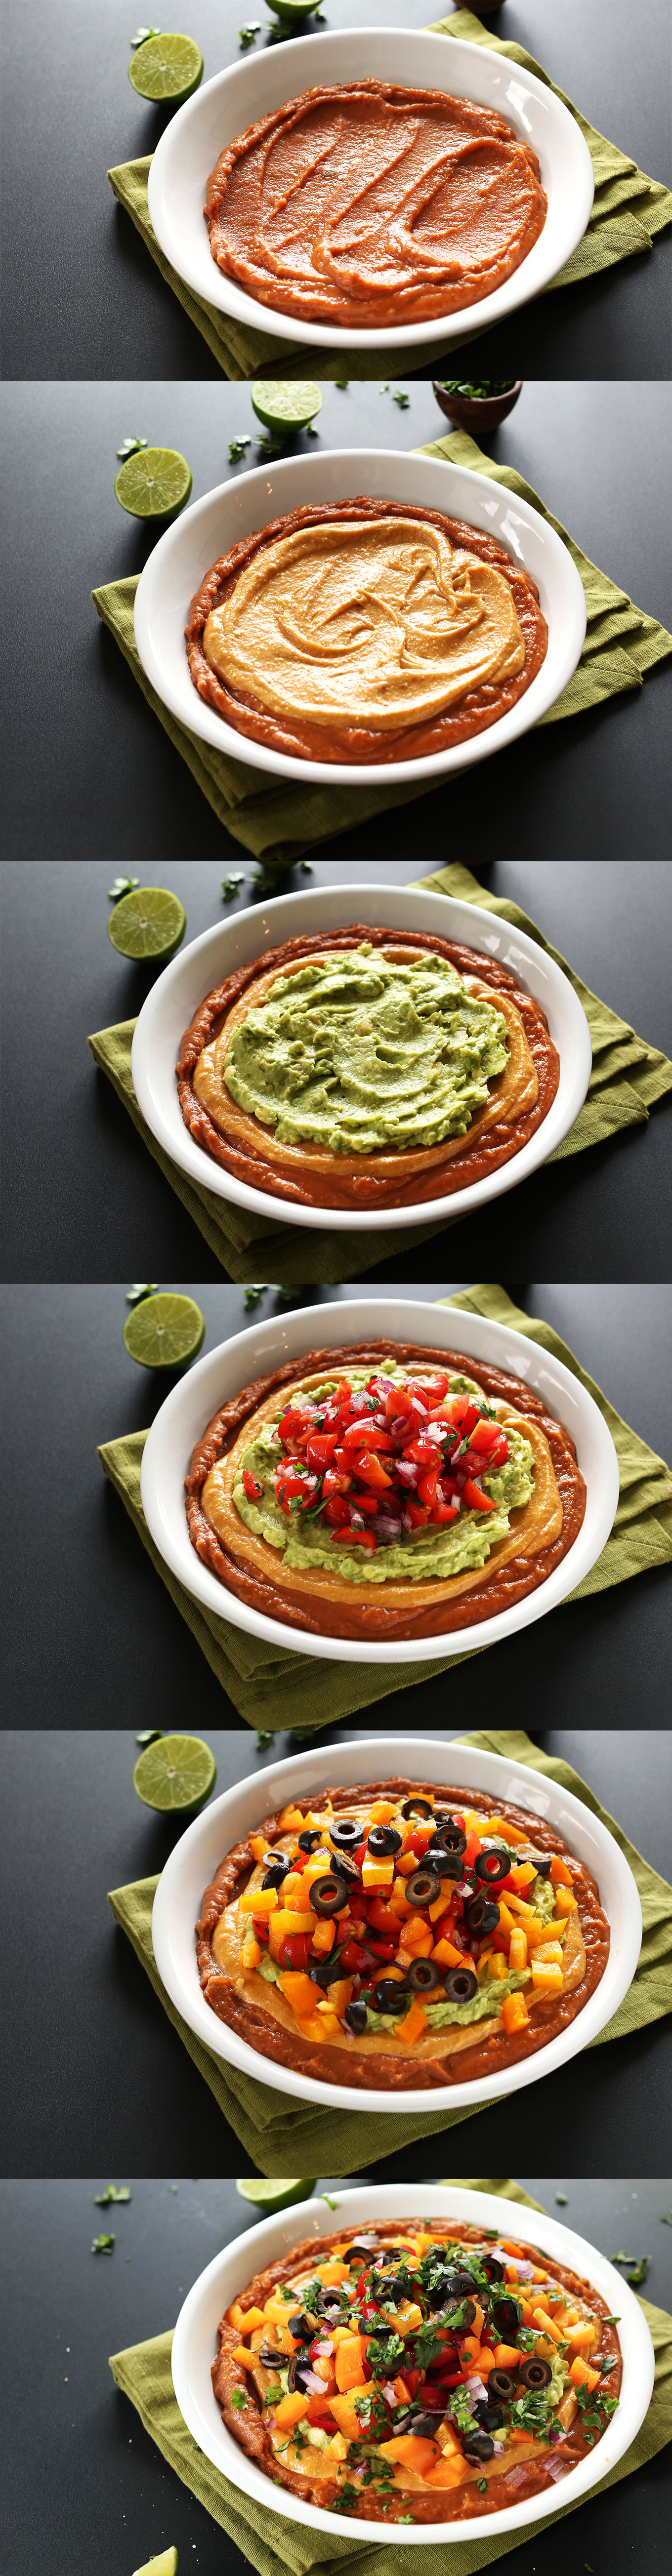 Series of photos showing each of the layers in our 7-Layer Vegan Mexican Dip recipe